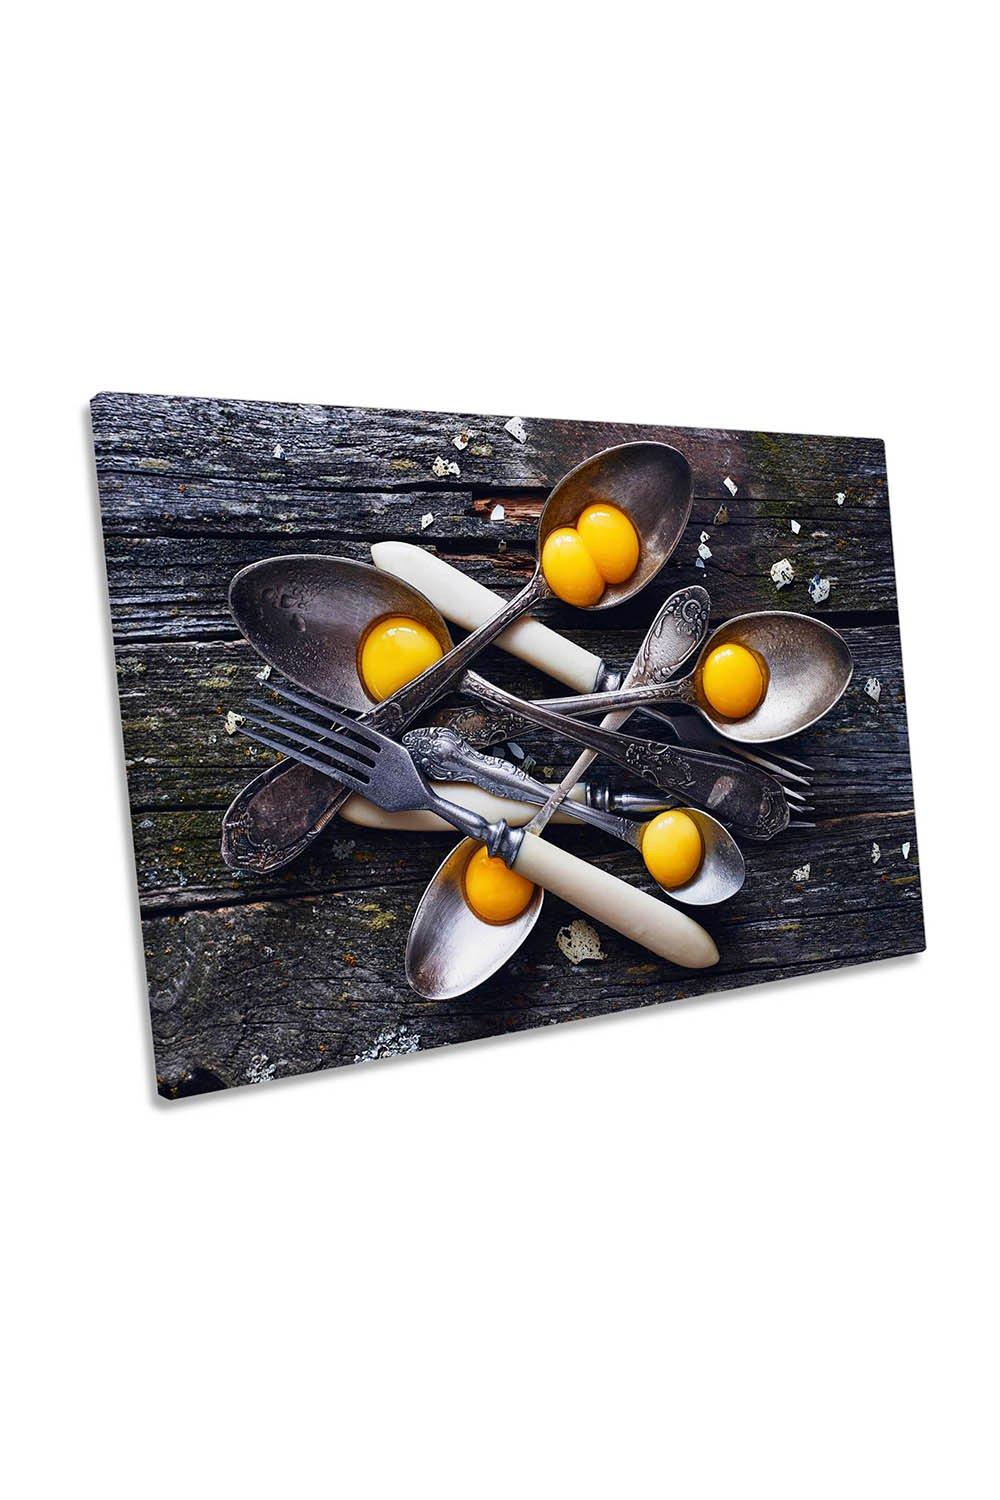 Spoons Egg Yolks Ingredients Kitchen Home Canvas Wall Art Picture Print